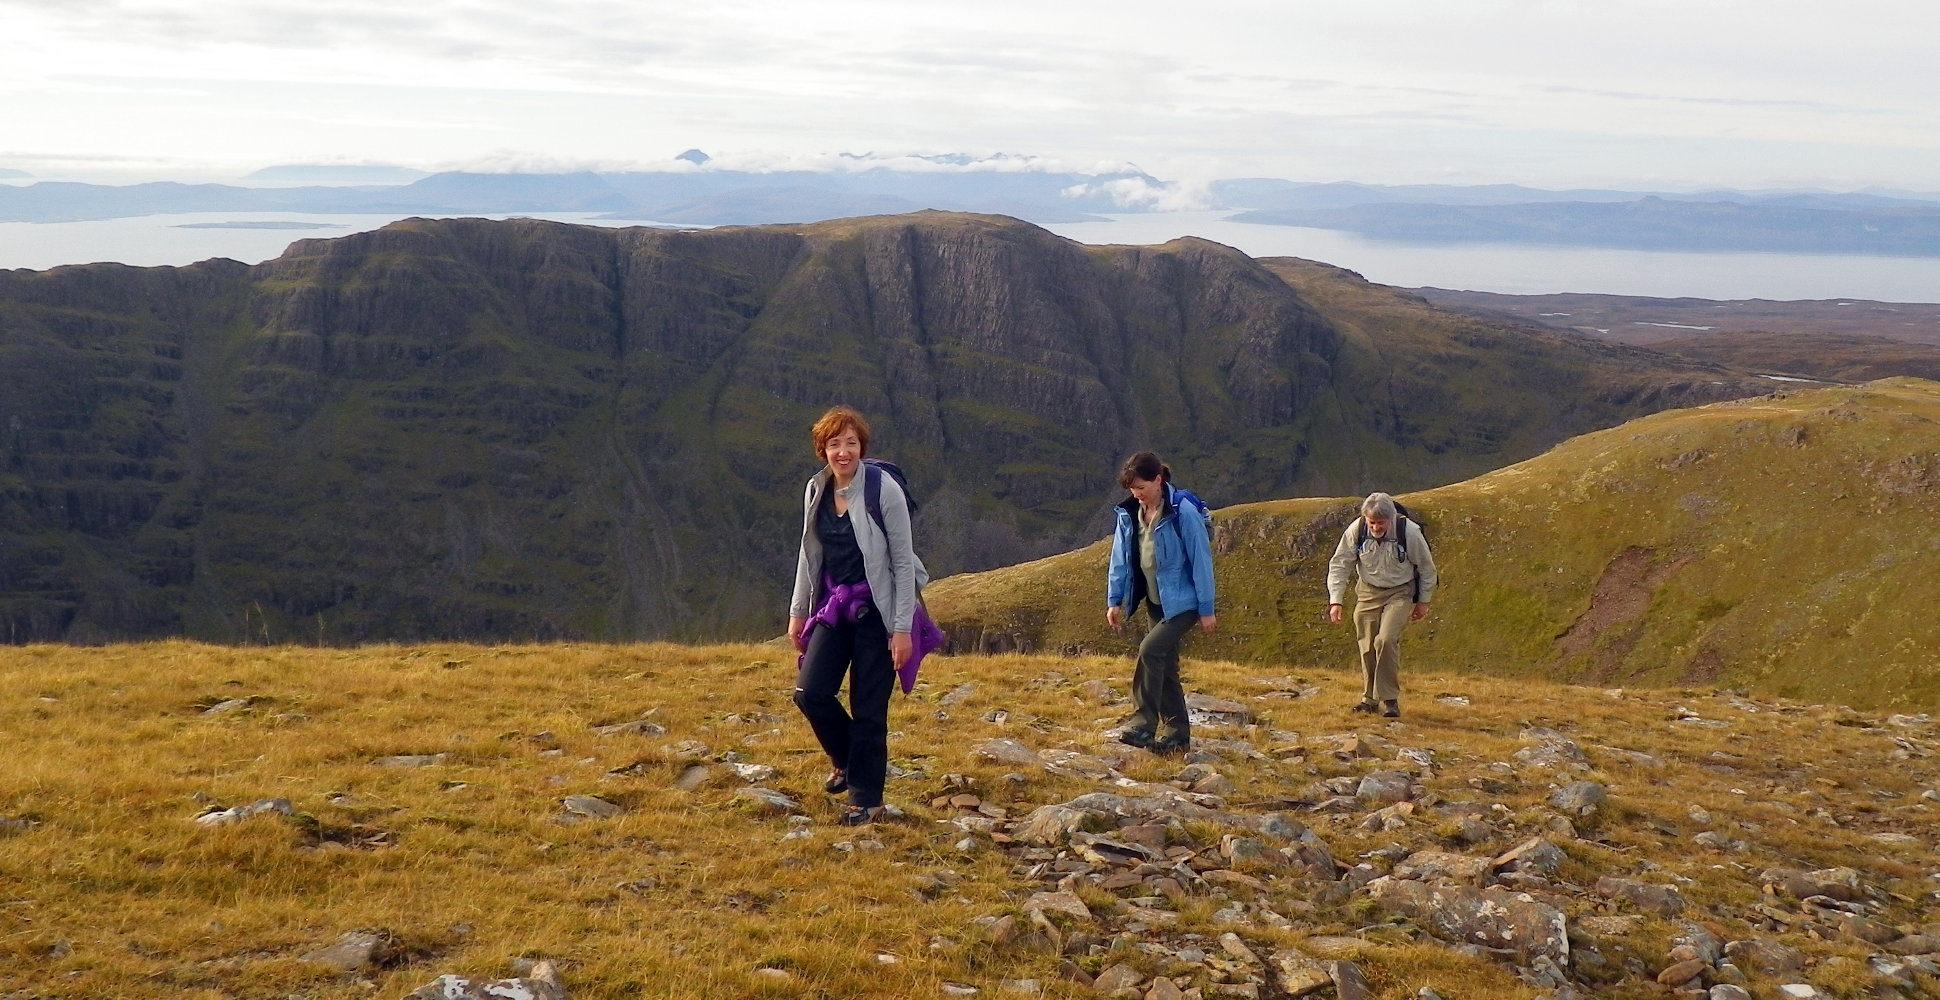 Hiking in the highlands of Scotland